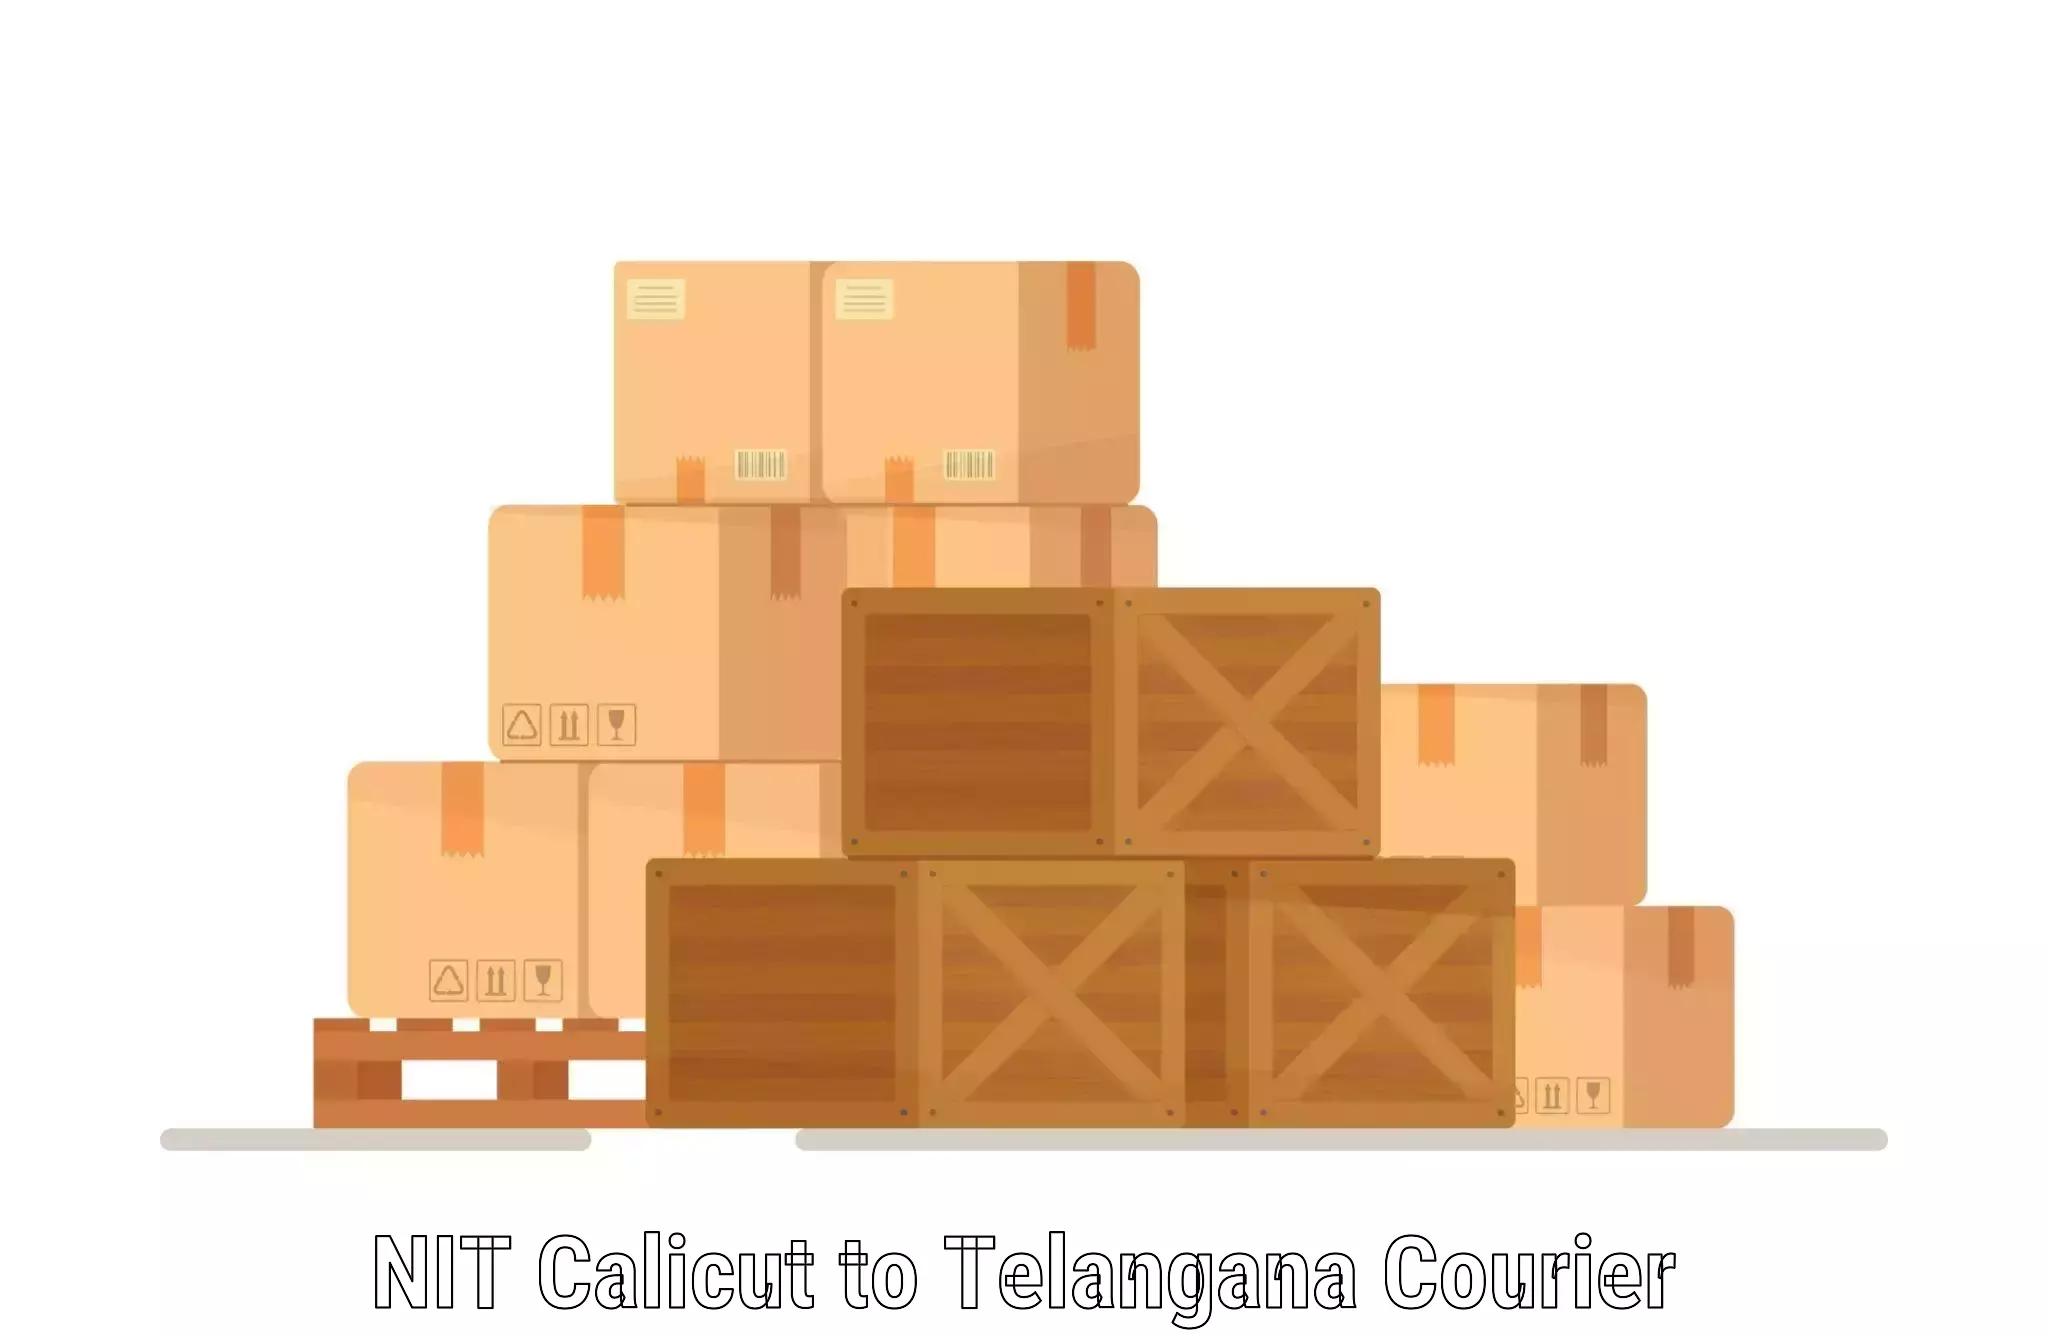 Cash on delivery service NIT Calicut to Telangana